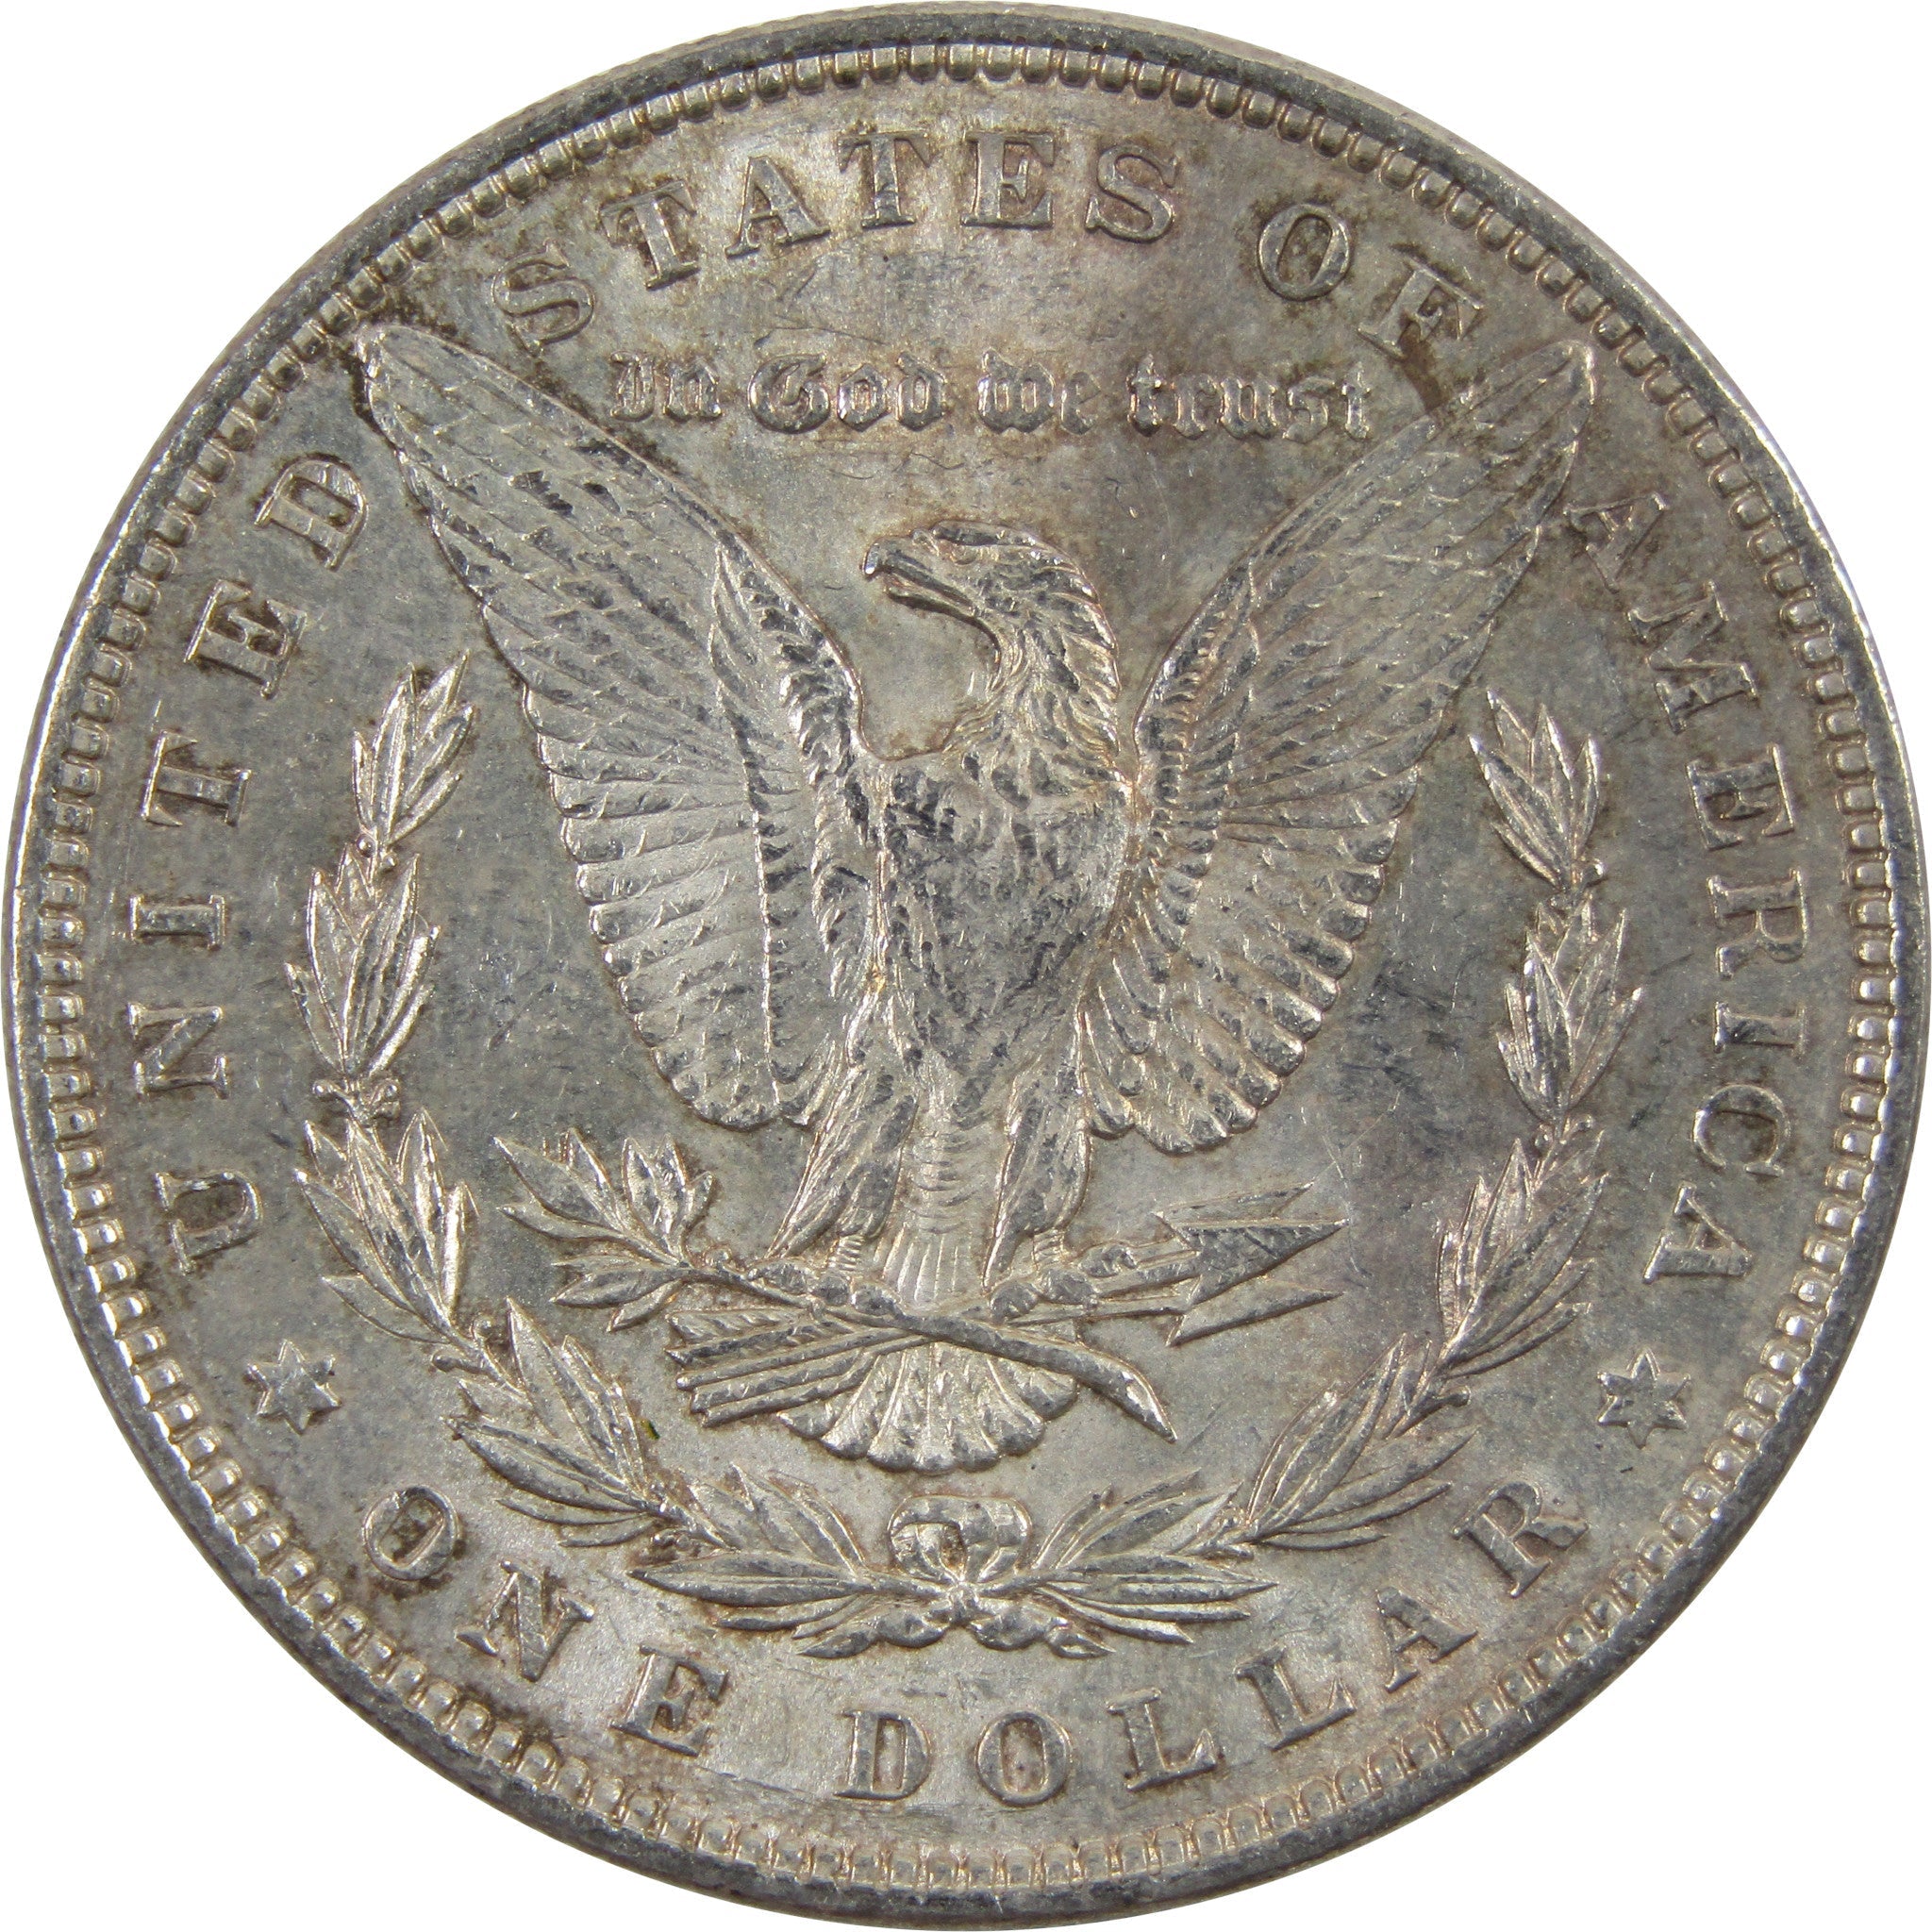 1886 Morgan Dollar AU About Uncirculated 90% Silver $1 Coin SKU:I5491 - Morgan coin - Morgan silver dollar - Morgan silver dollar for sale - Profile Coins &amp; Collectibles